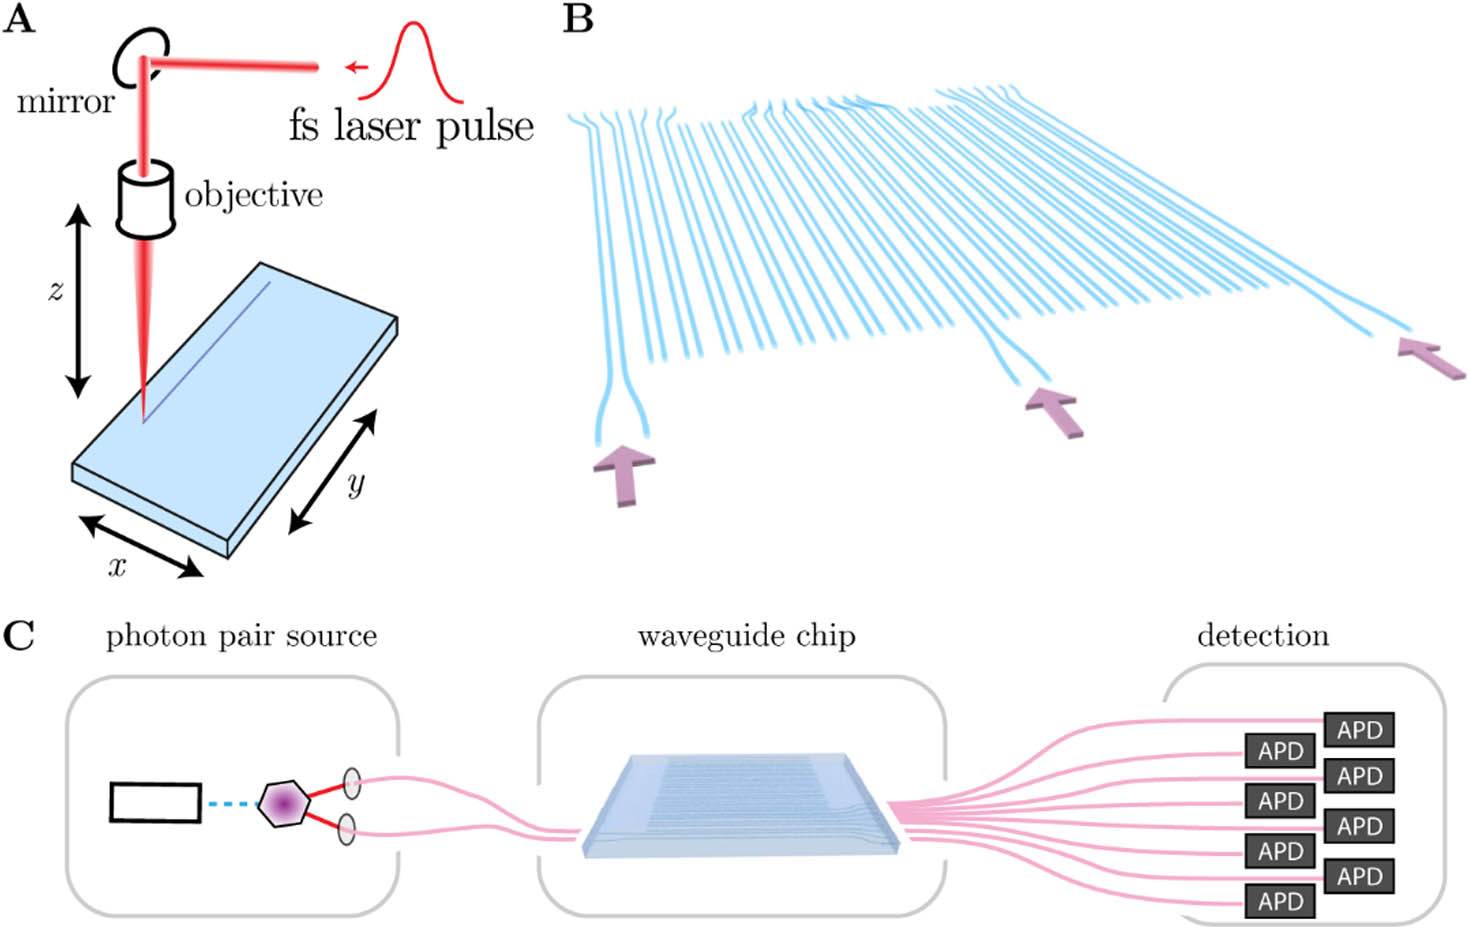 Experimental setup. (A) Direct laser writing technique: femtosecond-laser pulses are focused into a moving glass sample, forming a waveguide trajectory. (B) Waveguide structure, consisting of an incoupling fanning, the actual SSH waveguide lattice with alternating couplings, and a fan-out. The lattice can be excited in the bulk, at the trivial and topological edge. (C) The full experimental setup consists of a spontaneous parametric down conversion (SPDC) photon pair source, fiber arrays that couple the photons into and out of the functional structure on the chip, and avalanche photodetectors.